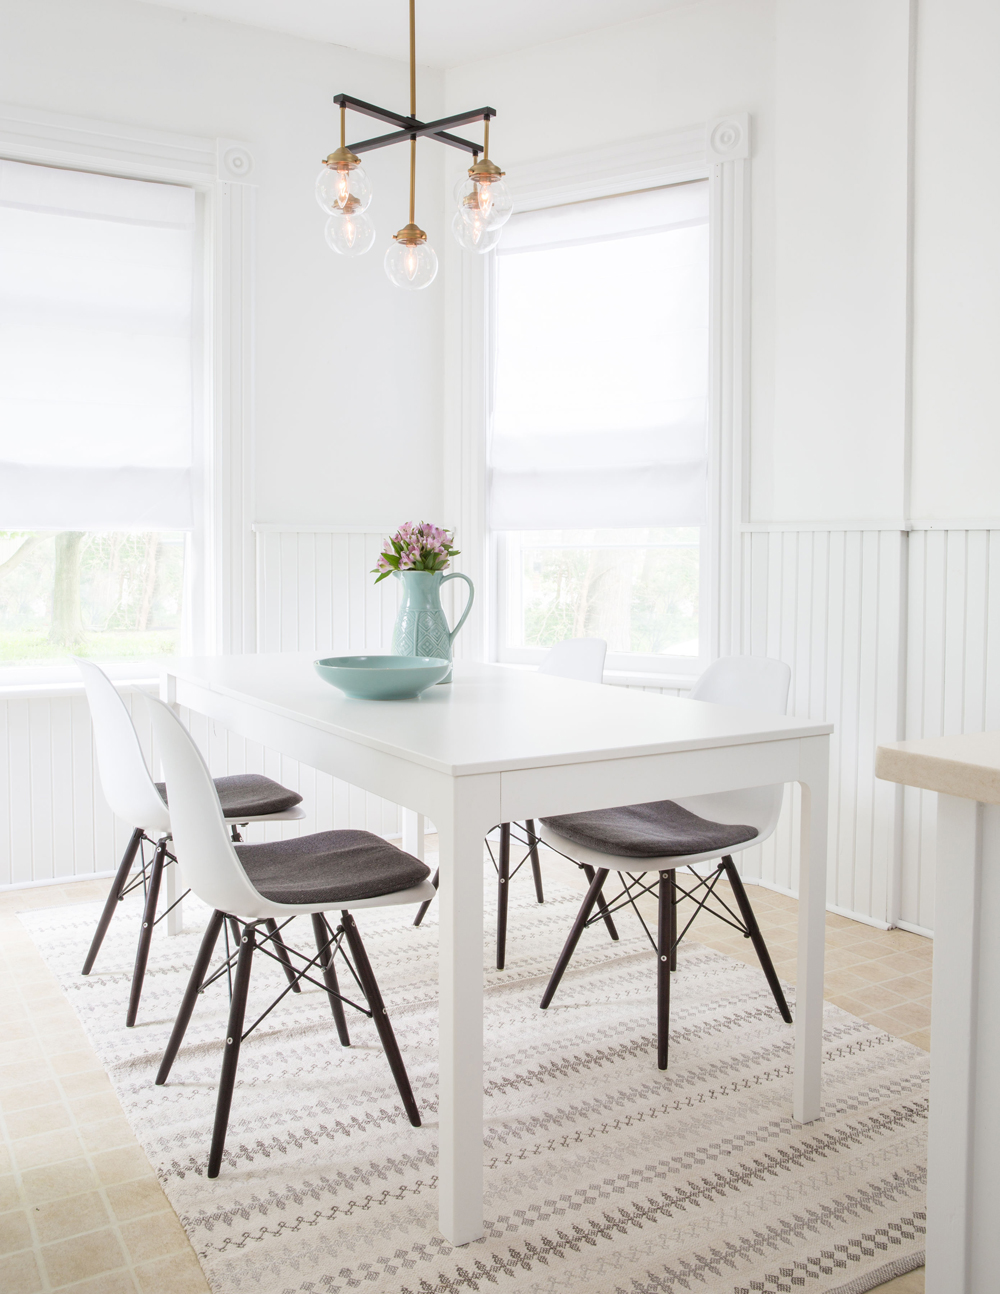 A bright and sunny white breakfast nook in the renovated kitchen